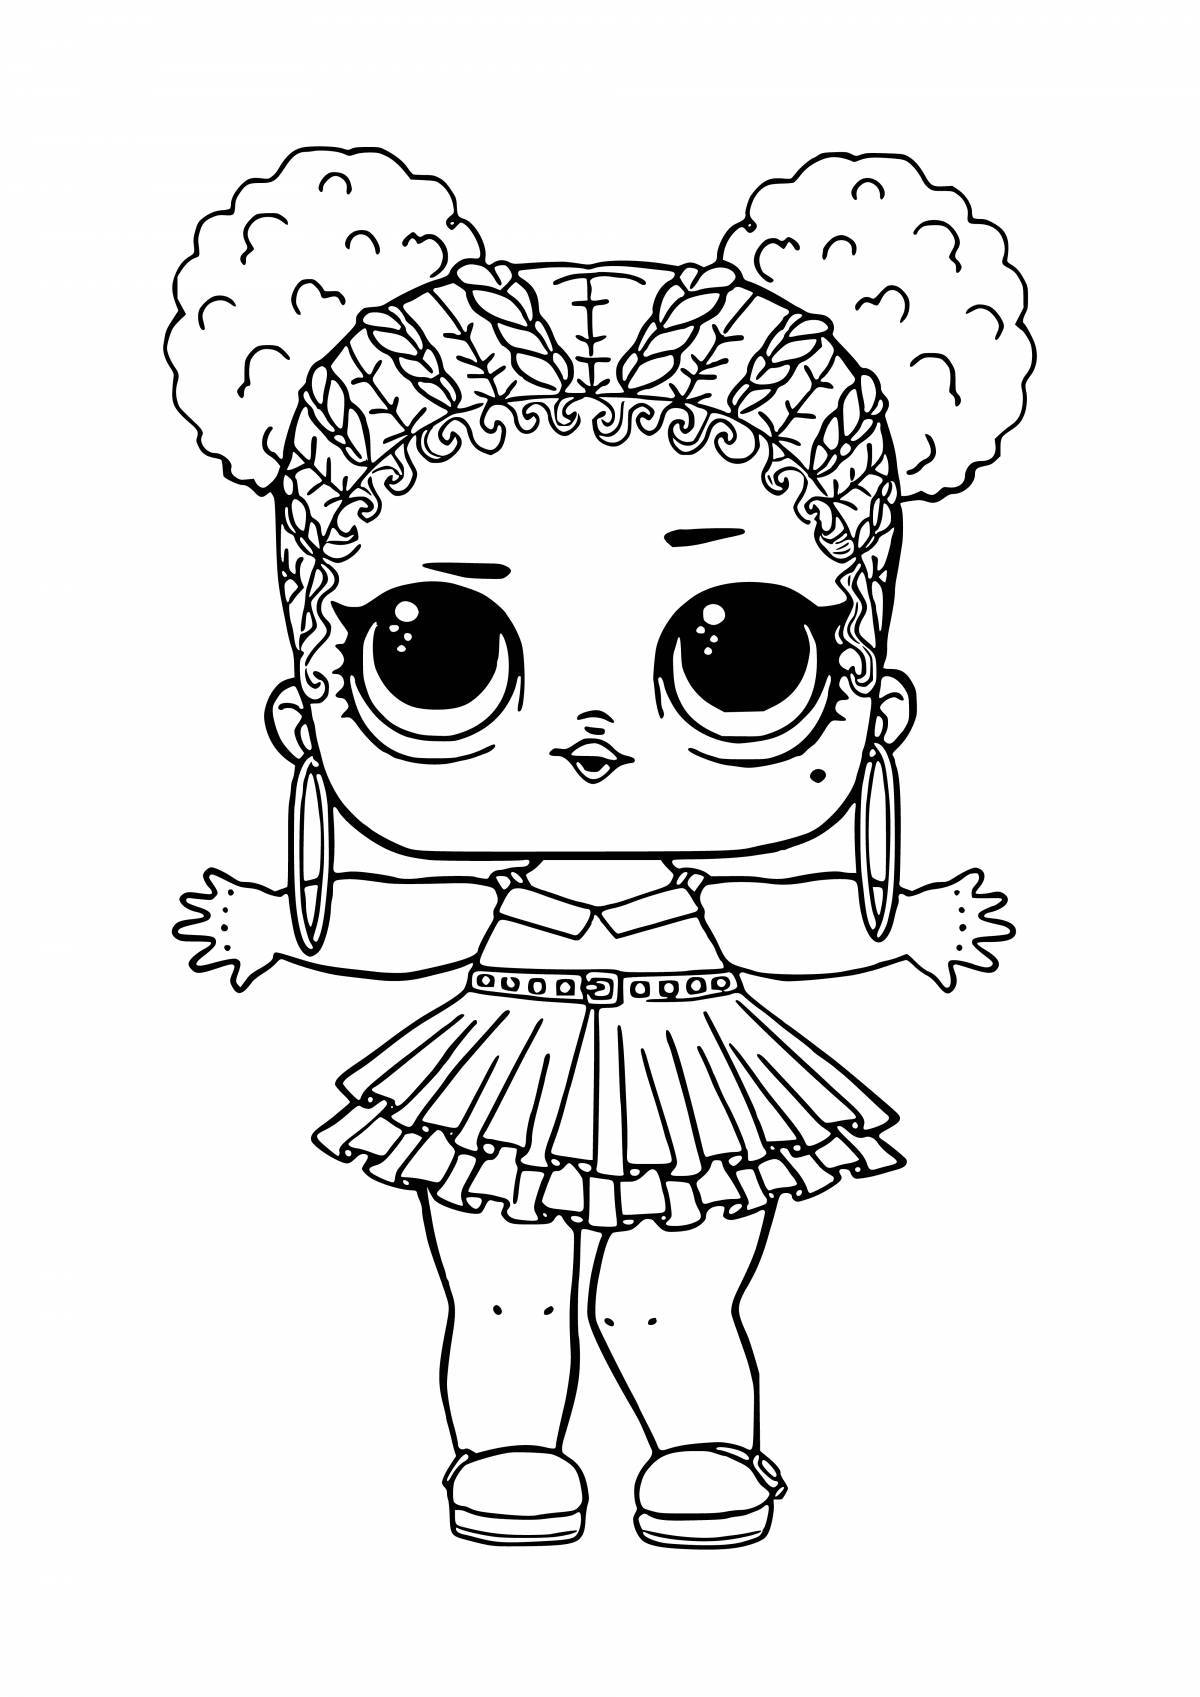 Fairytale coloring lol doll